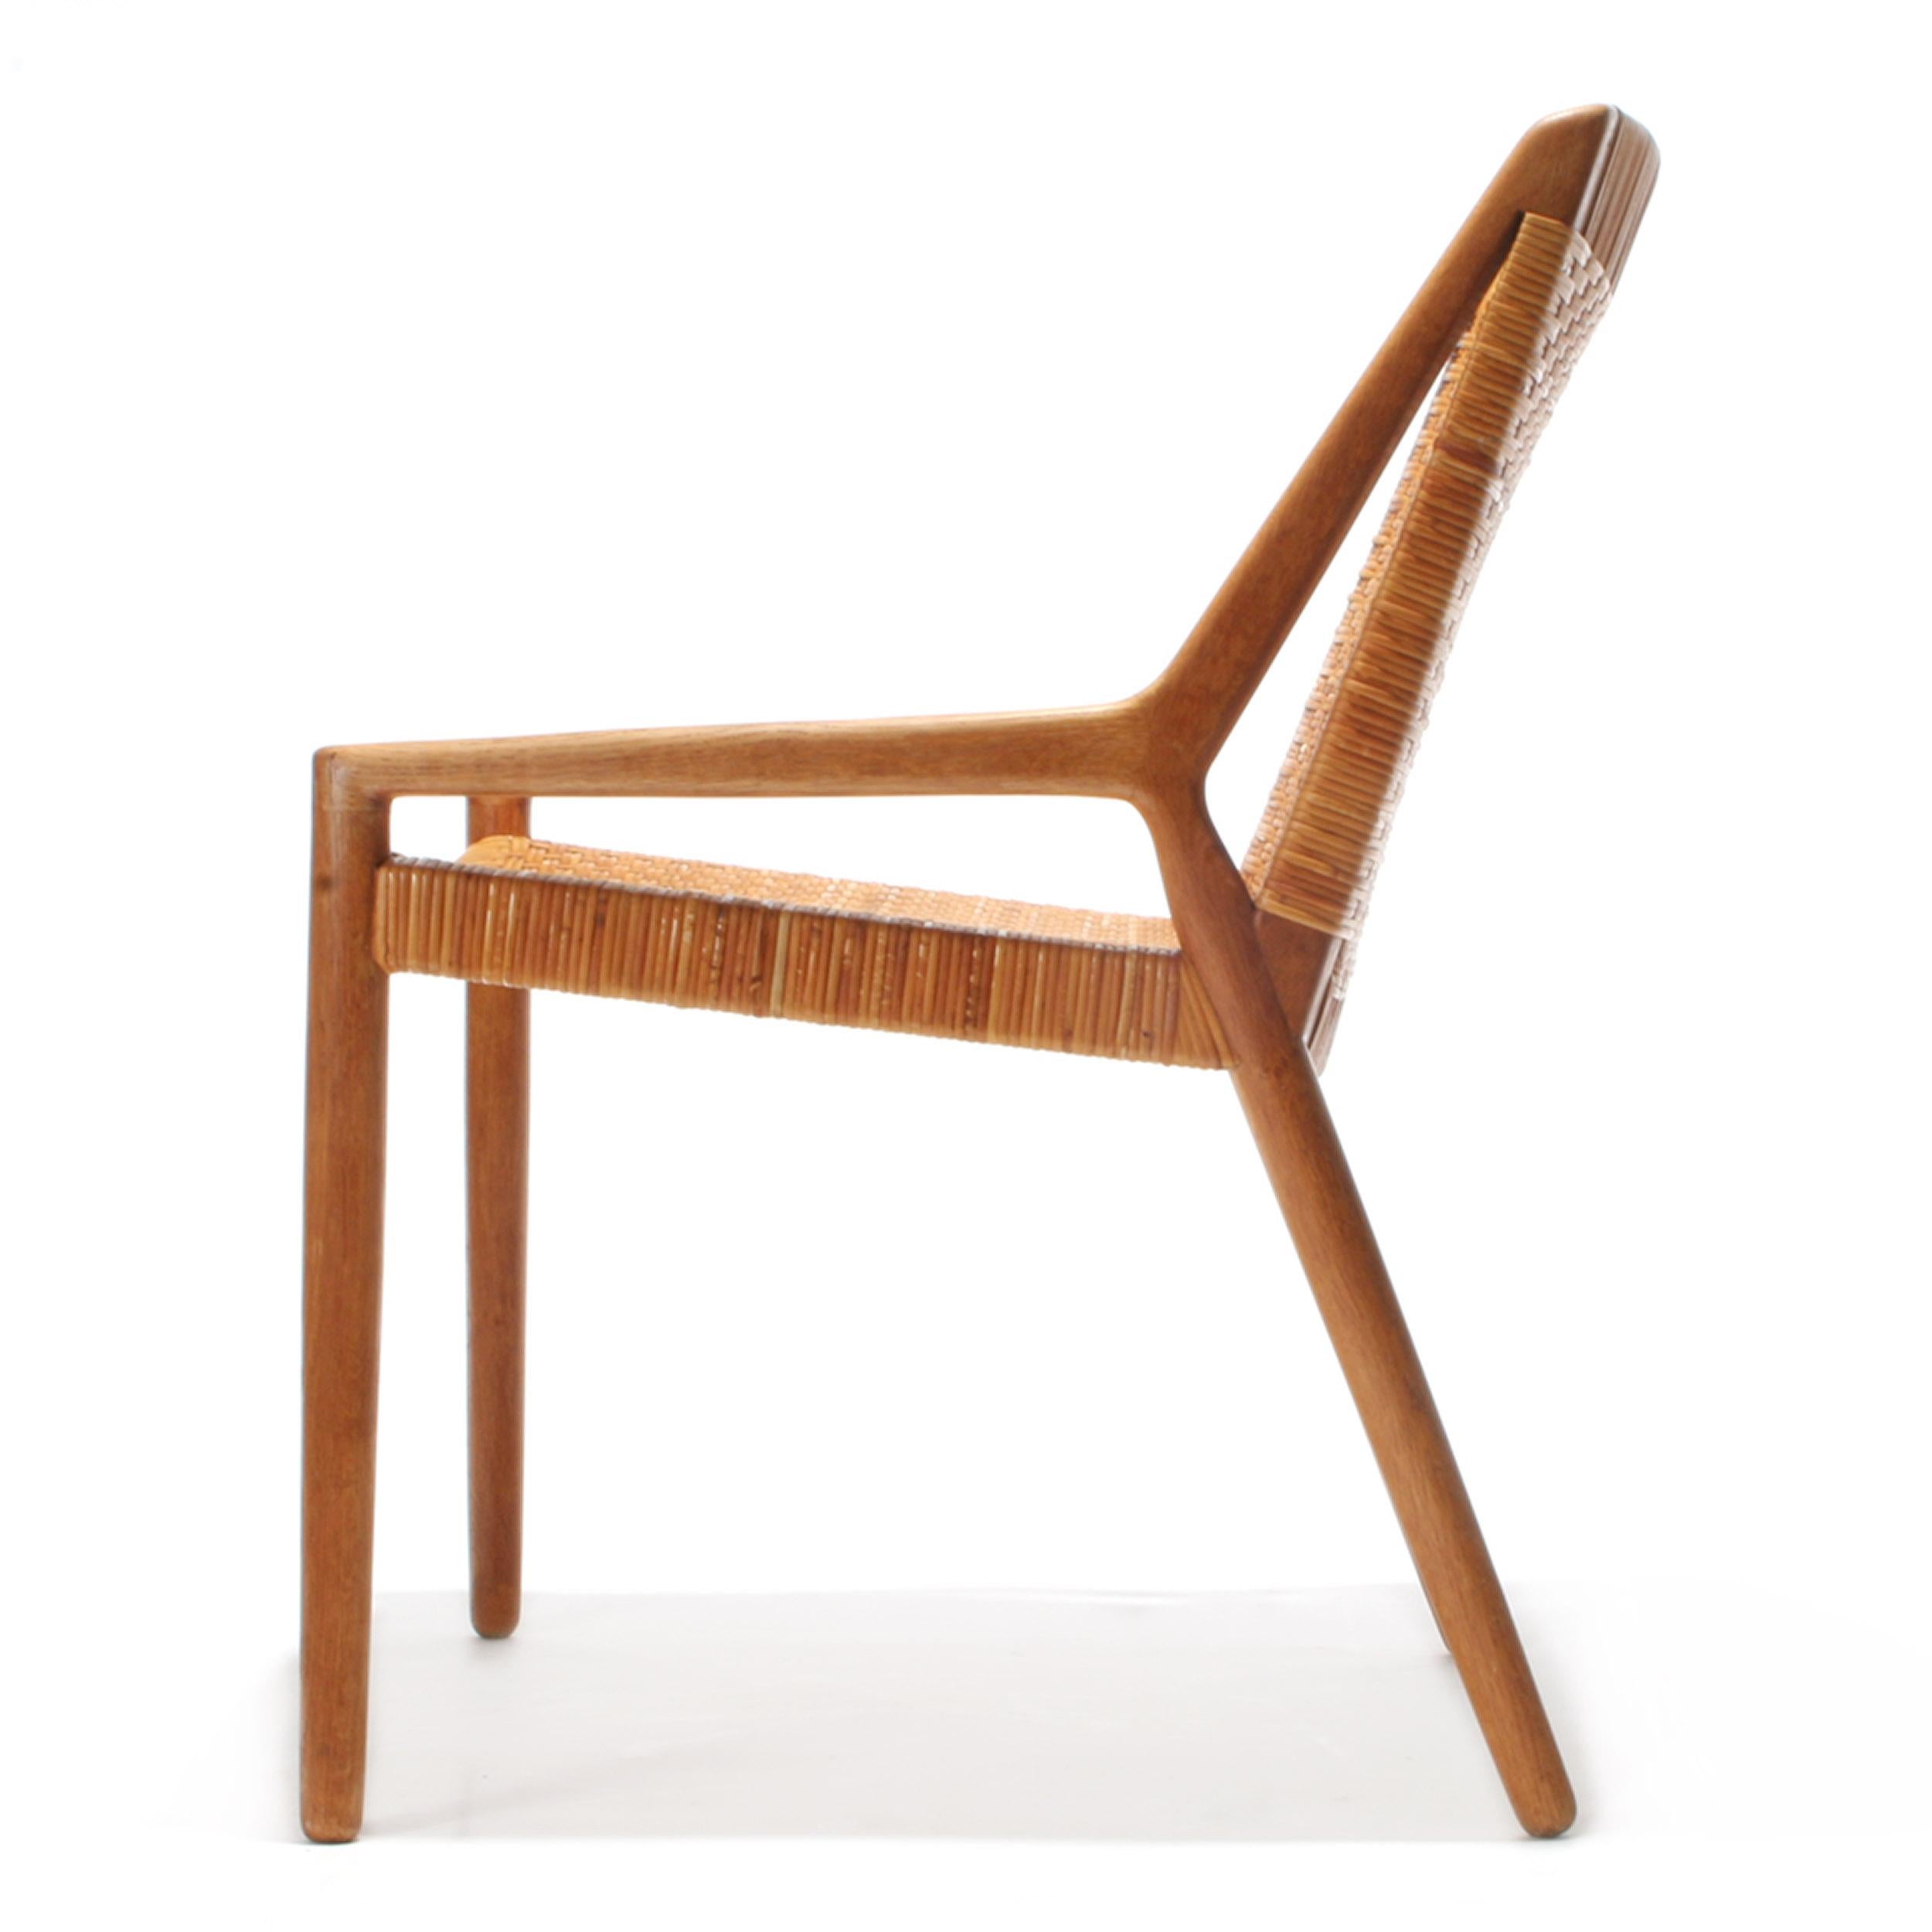 A rare Scandinavian Modern armchair designed by Ejner Larsen & Aksel Bender Madsen. The design features oak and caned in a modern linear form. Produced by Willy Beck in Denmark, circa 1950s.